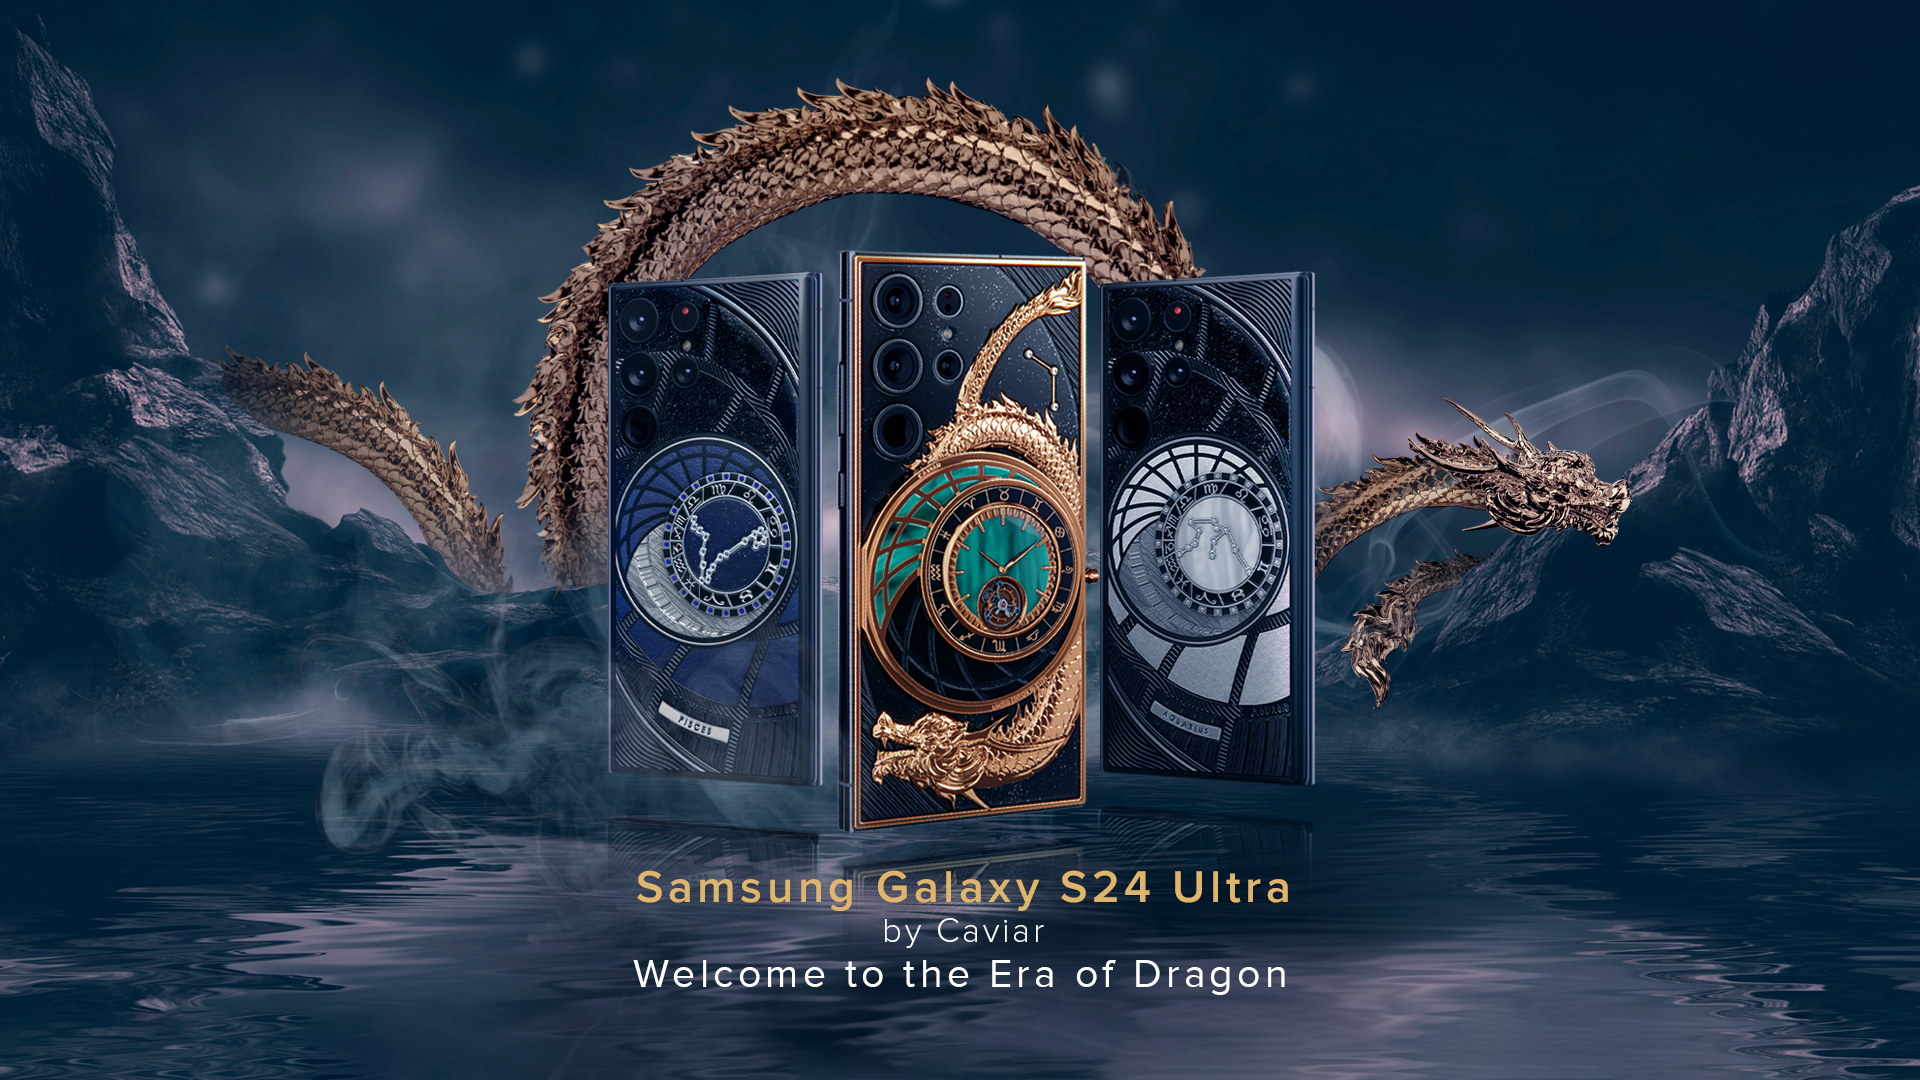 Caviar incrusted the world first custom Samsung S24 Ultra with a mechanical watch and 24K gold dragon